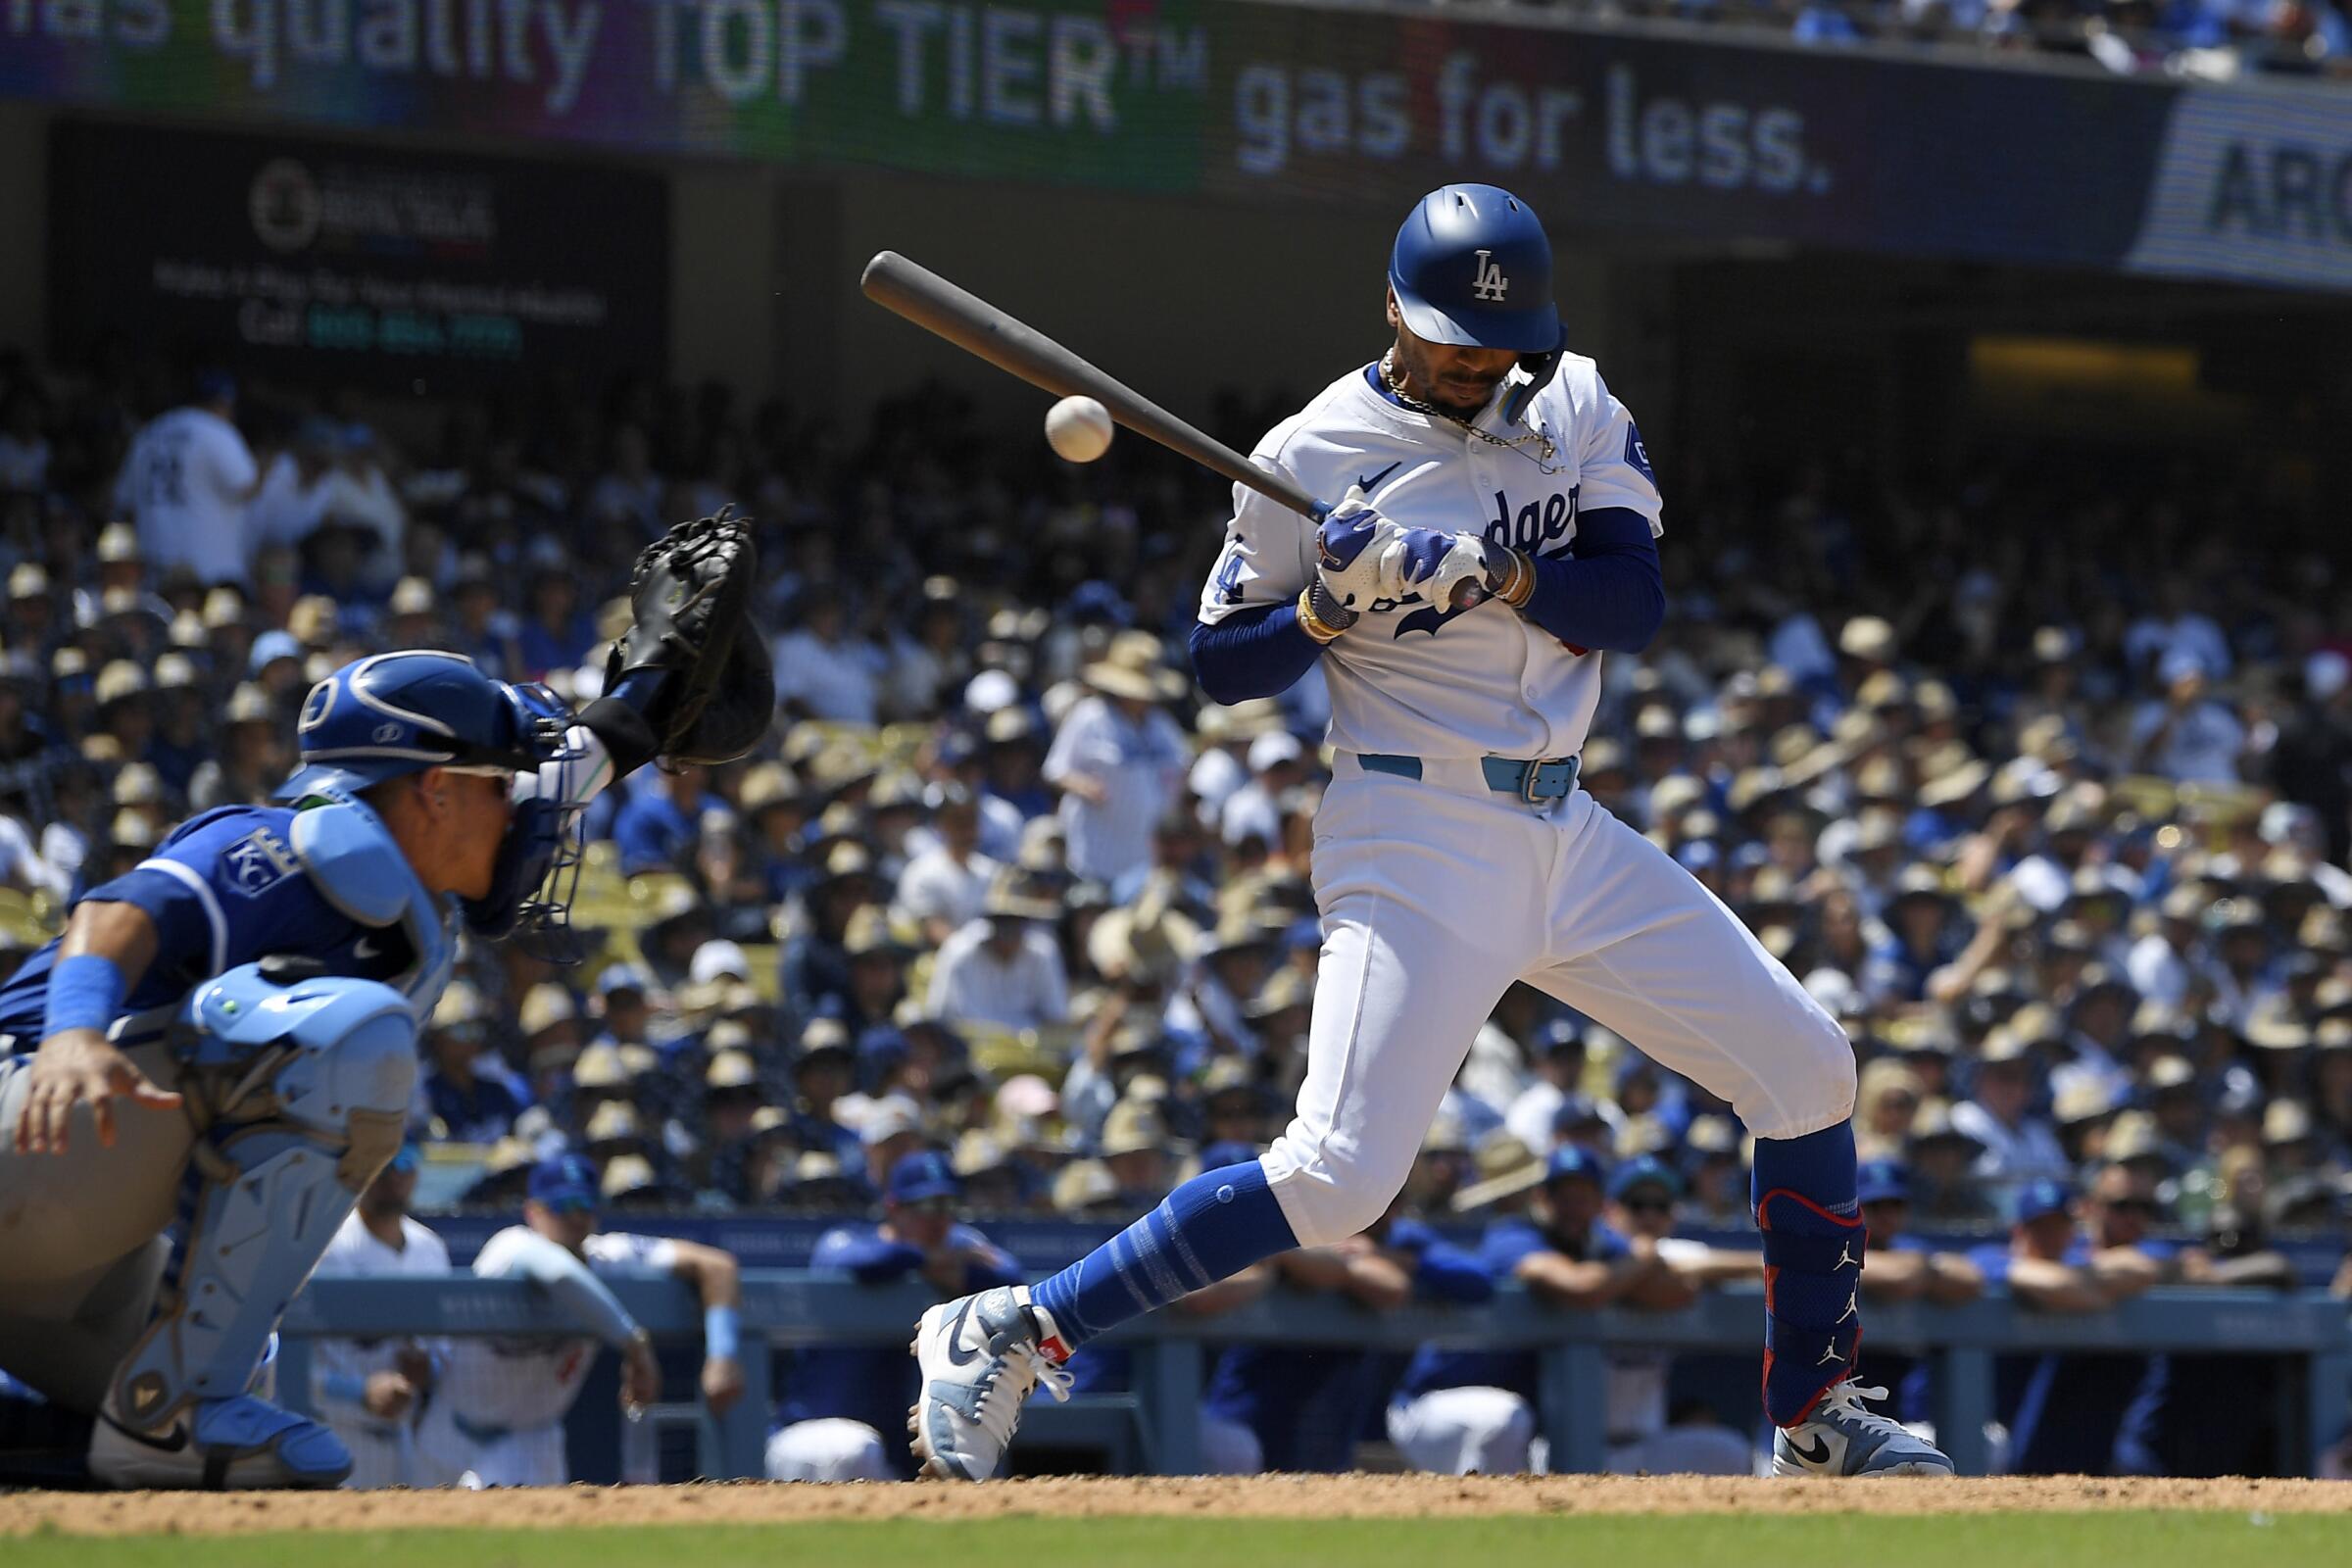 Dodgers star Mookie Betts takes a pitch off his left hand during an at-bat at Dodger Stadium.